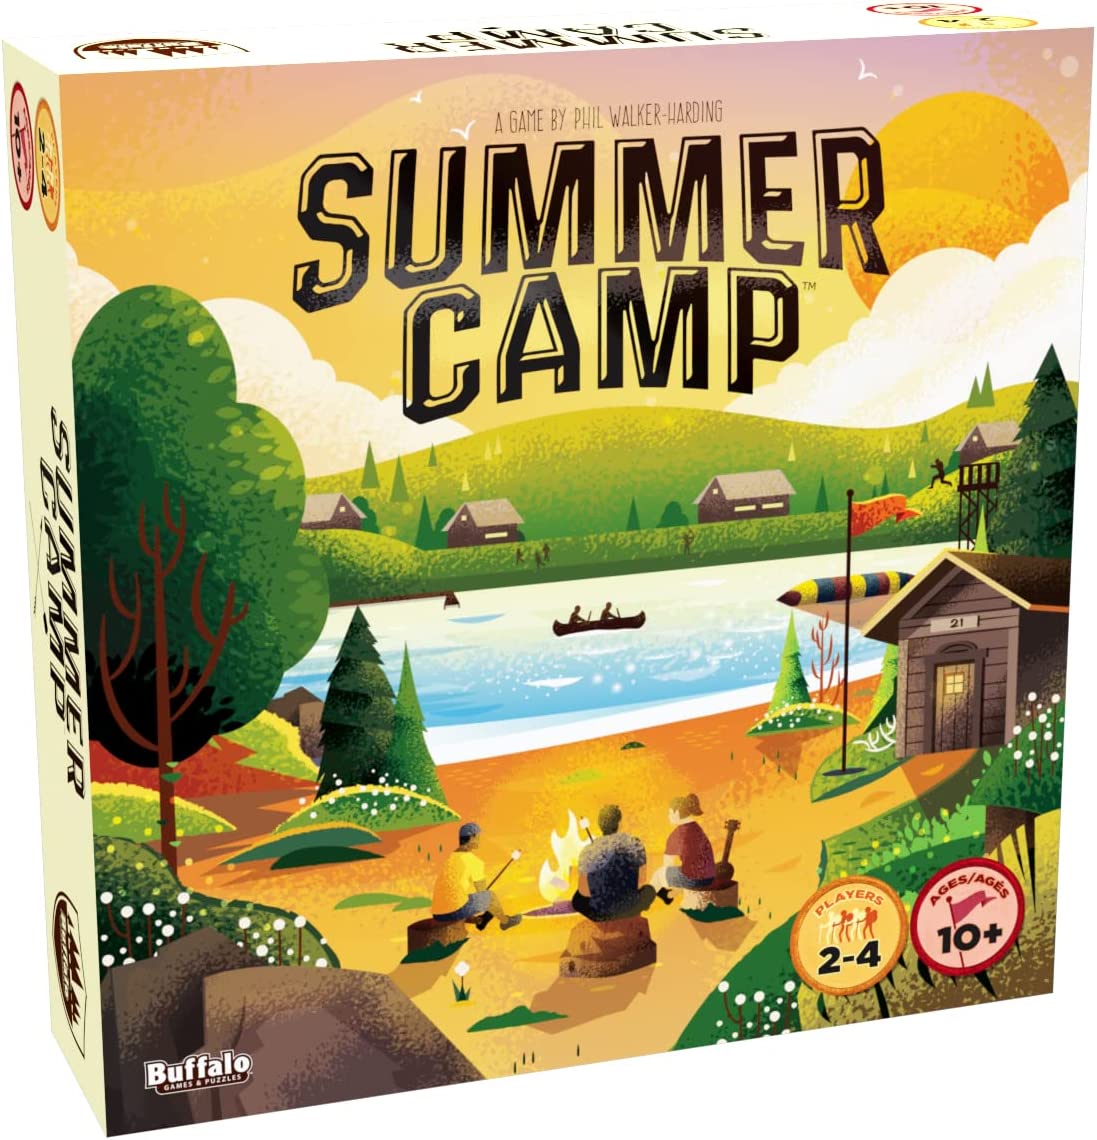 A picture of the board game Summer Camp. The artwork is of an idyllic lakeside campground where three teens sit around a fire toasting marshmallows.